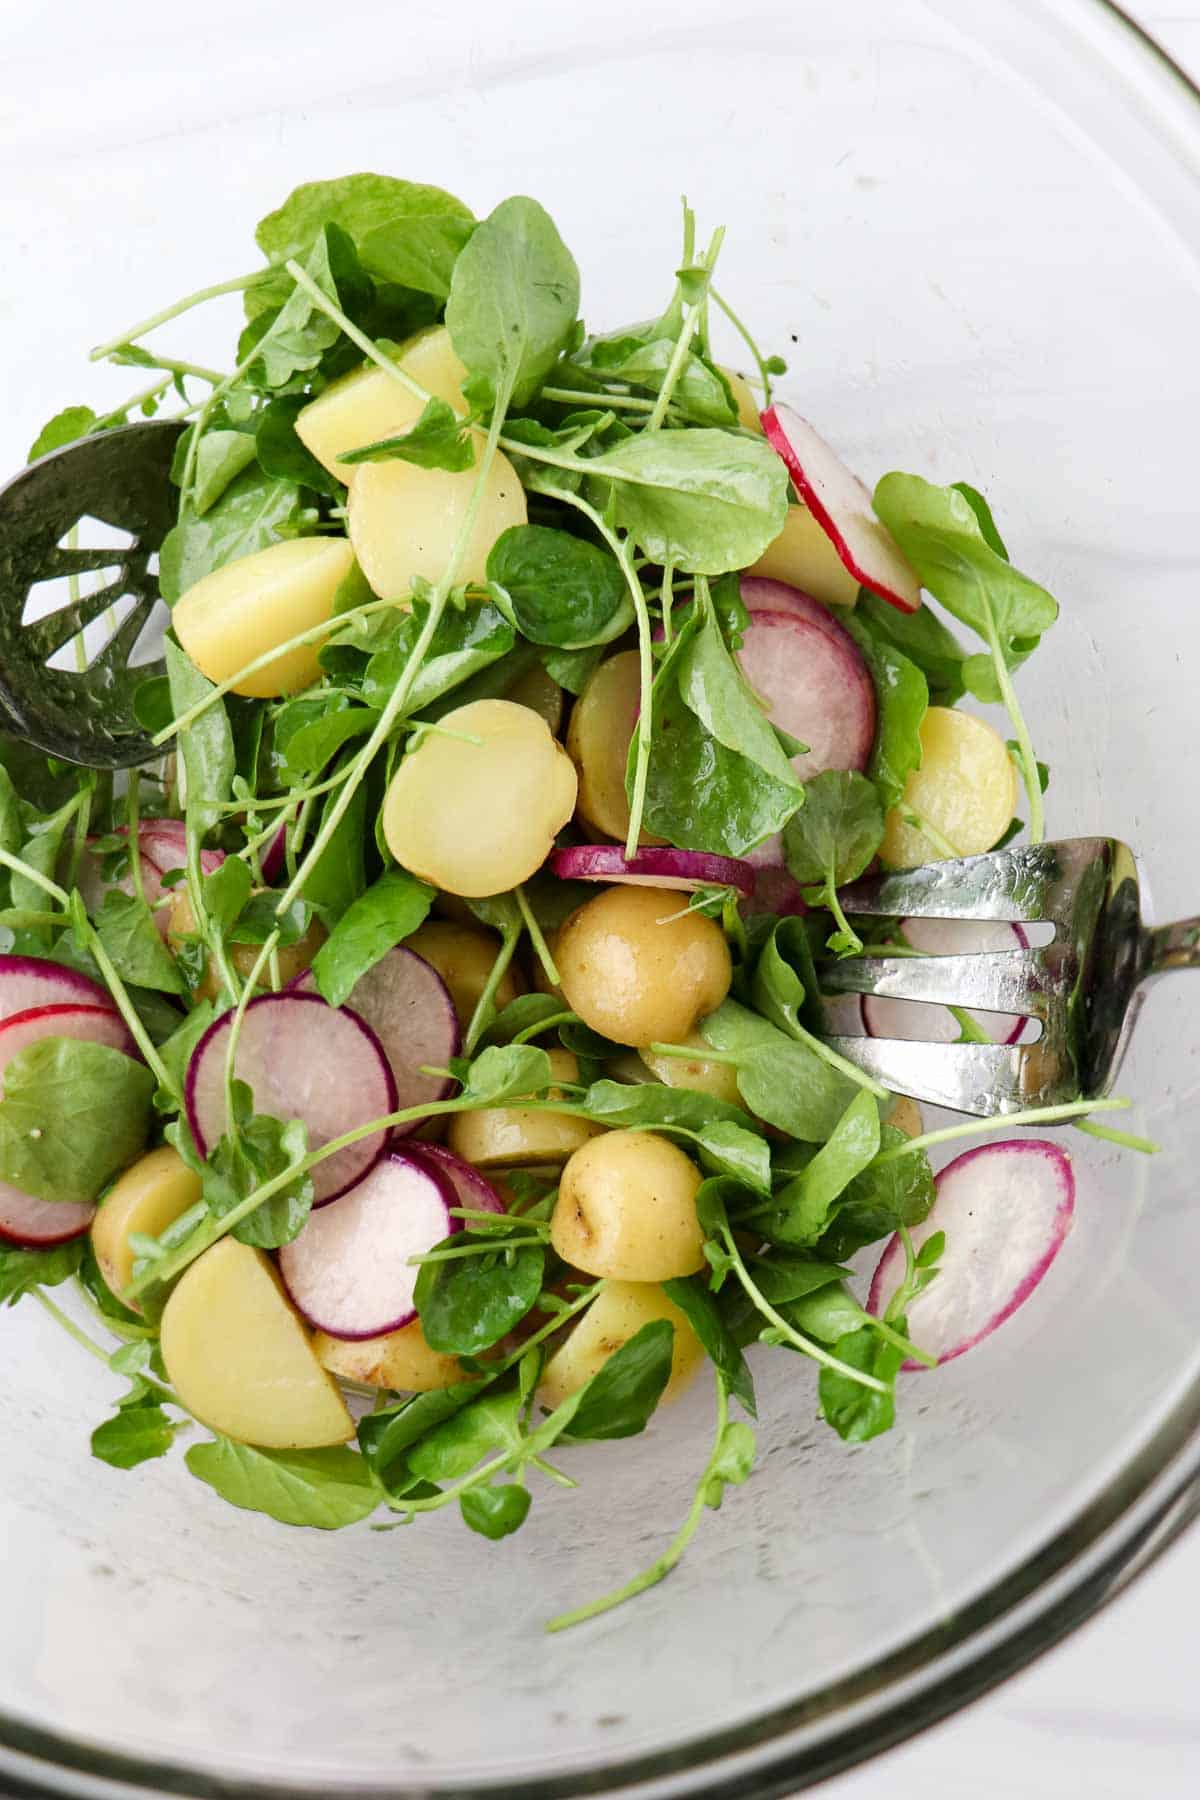 Potatoes, greens and radishes tossed together with a vinaigrette in a glass bowl.